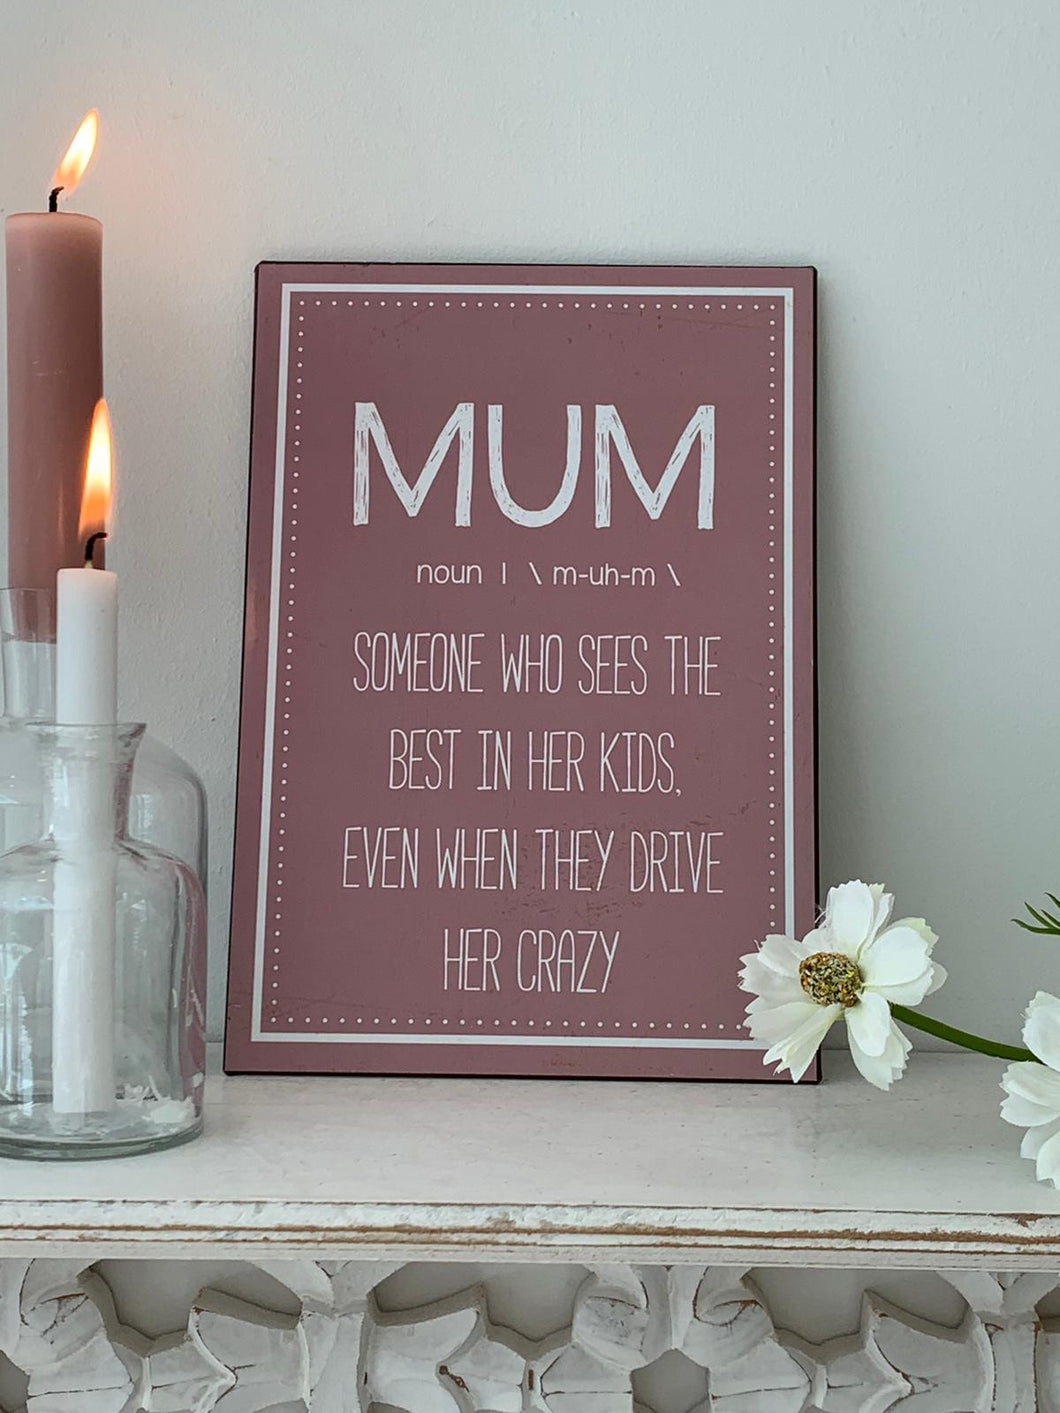 Mum Metal sign ... Sees the best in her kids